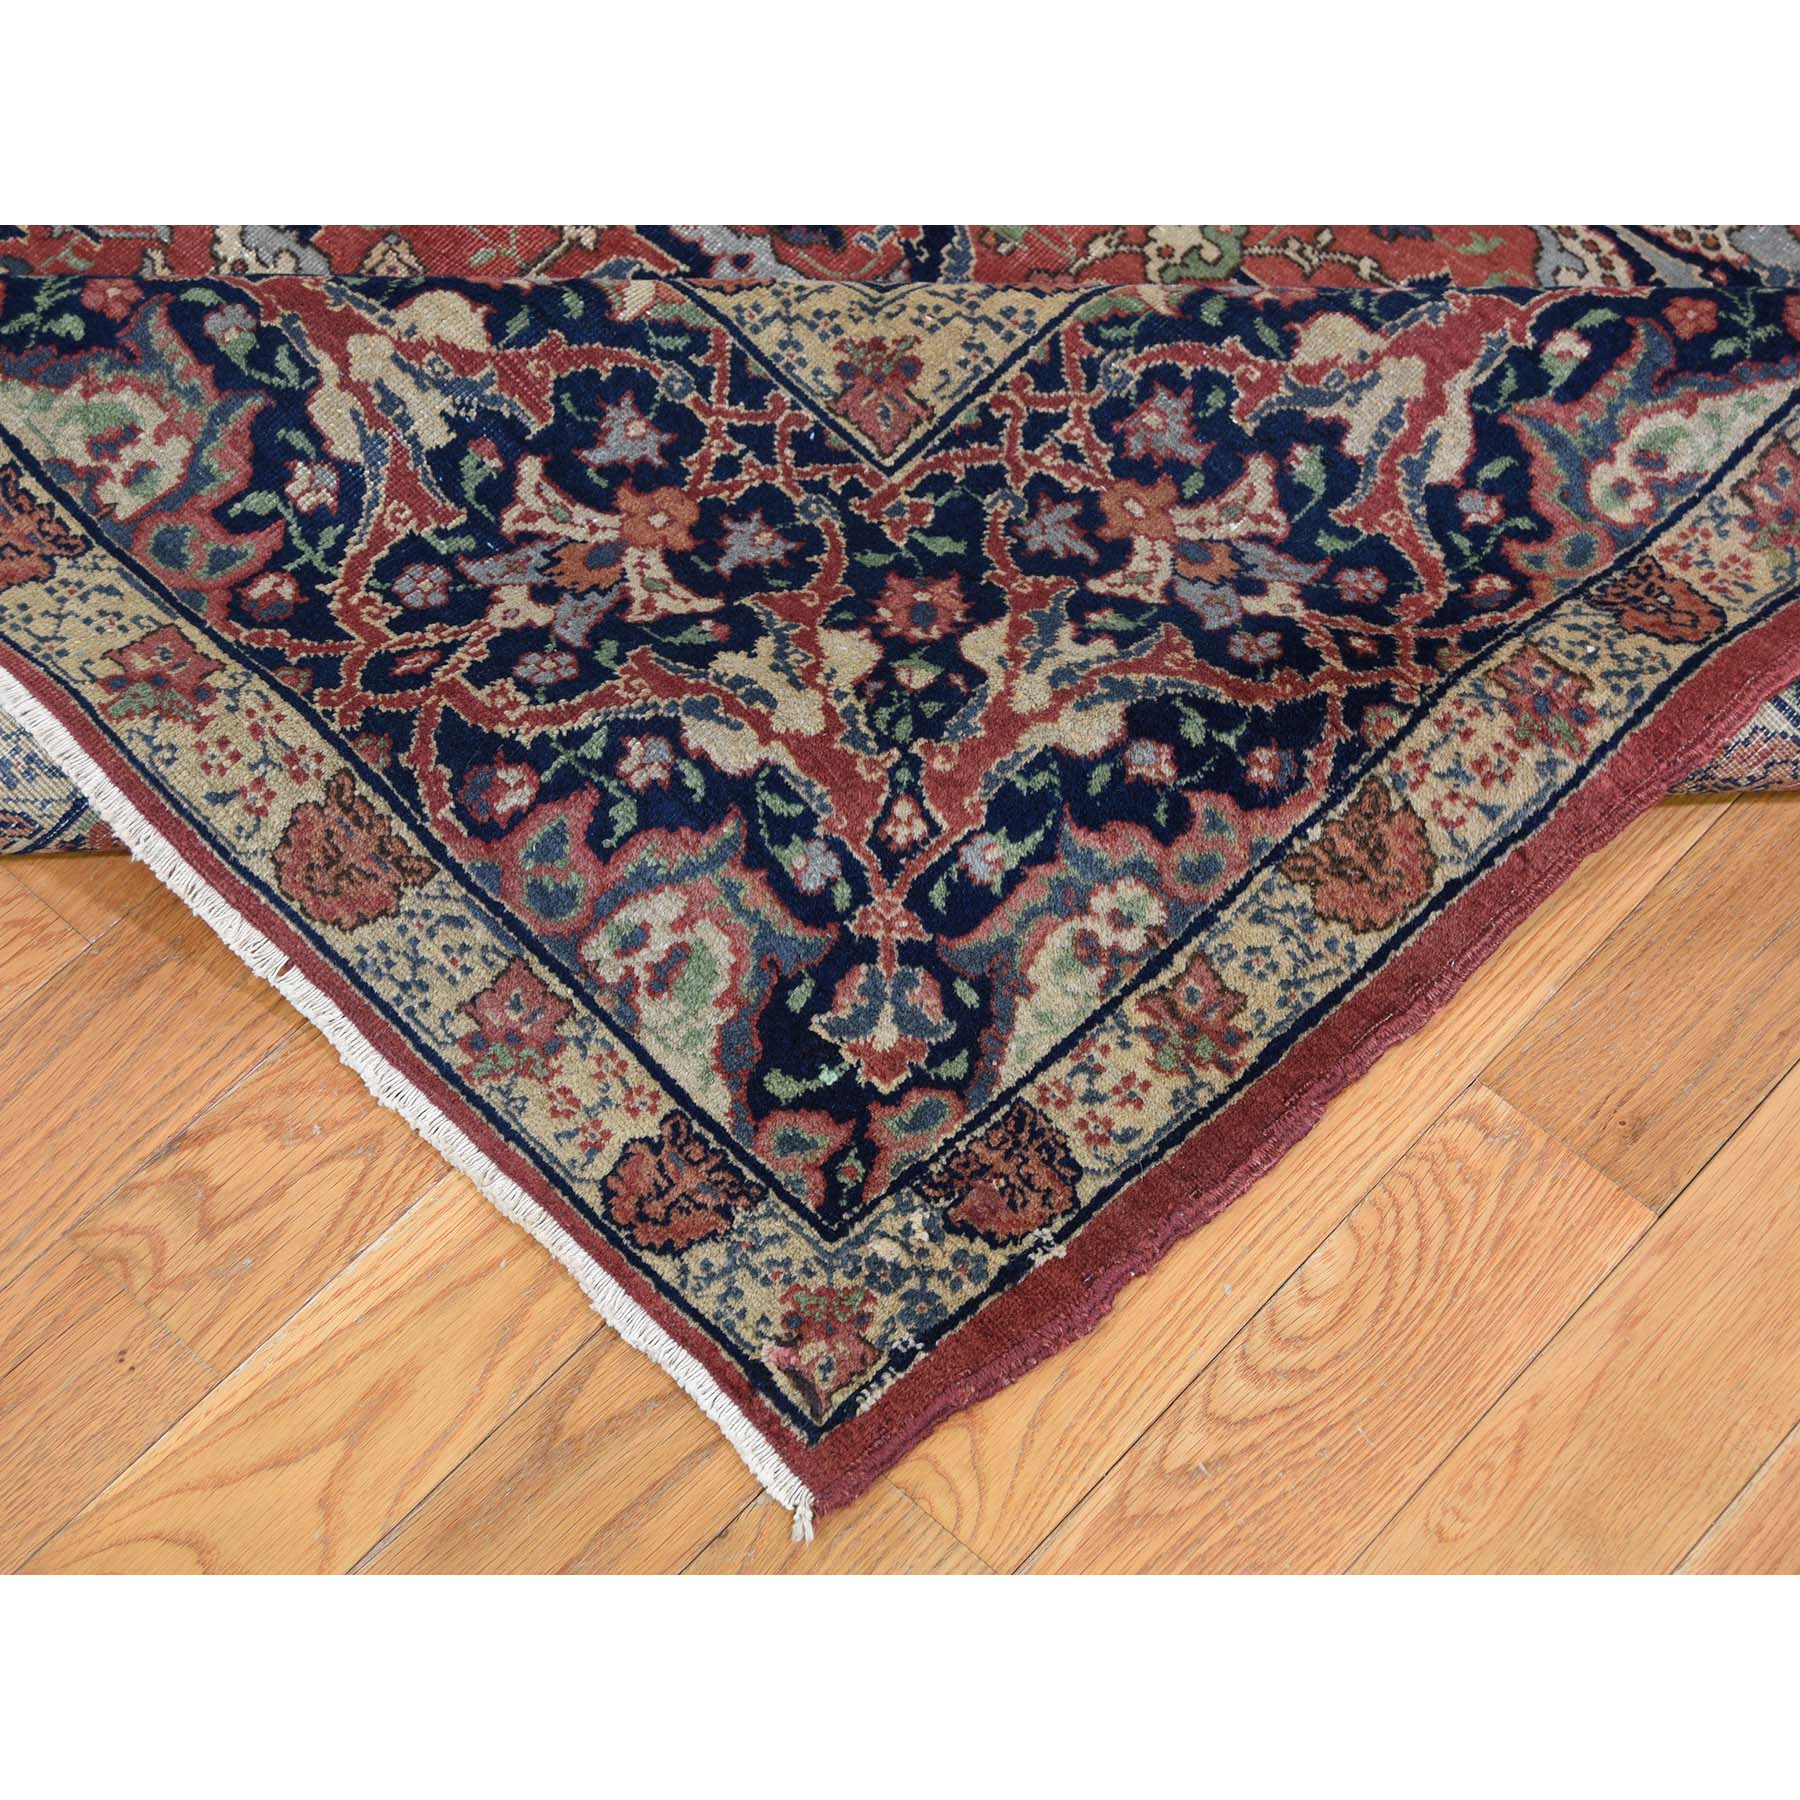 8-4 x11- Antique Persian Tabriz Pure Wool Good Condition Some Wear Hand-Knotted Oriental Rug 